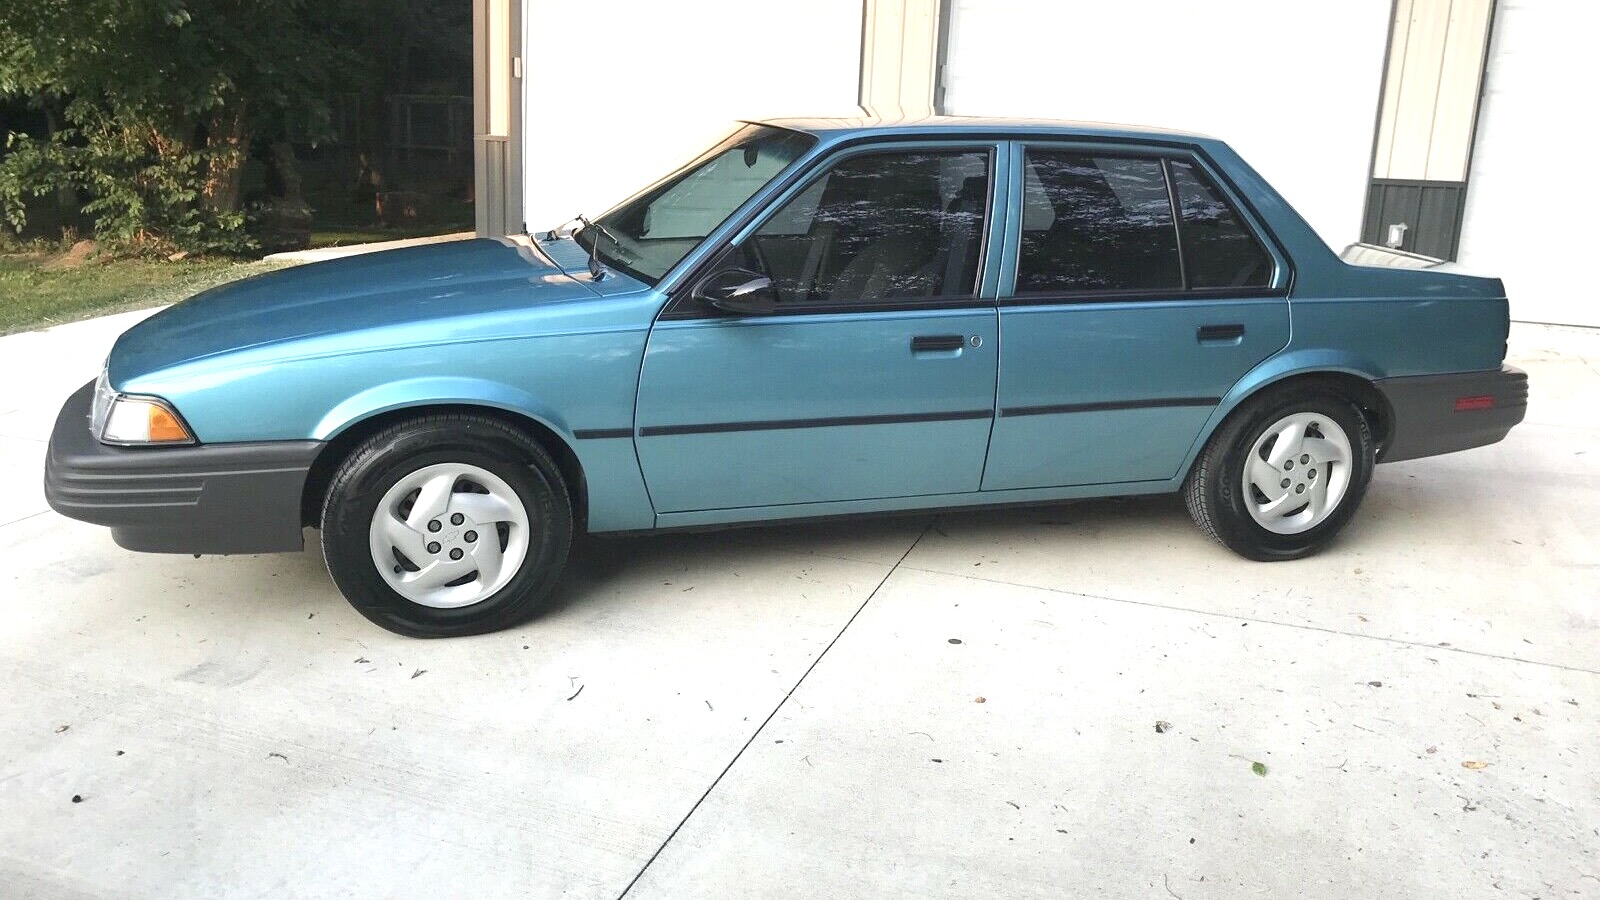 Once an invisible econobox, today, this '94 Chevy Cavalier turns heads - Autoblog